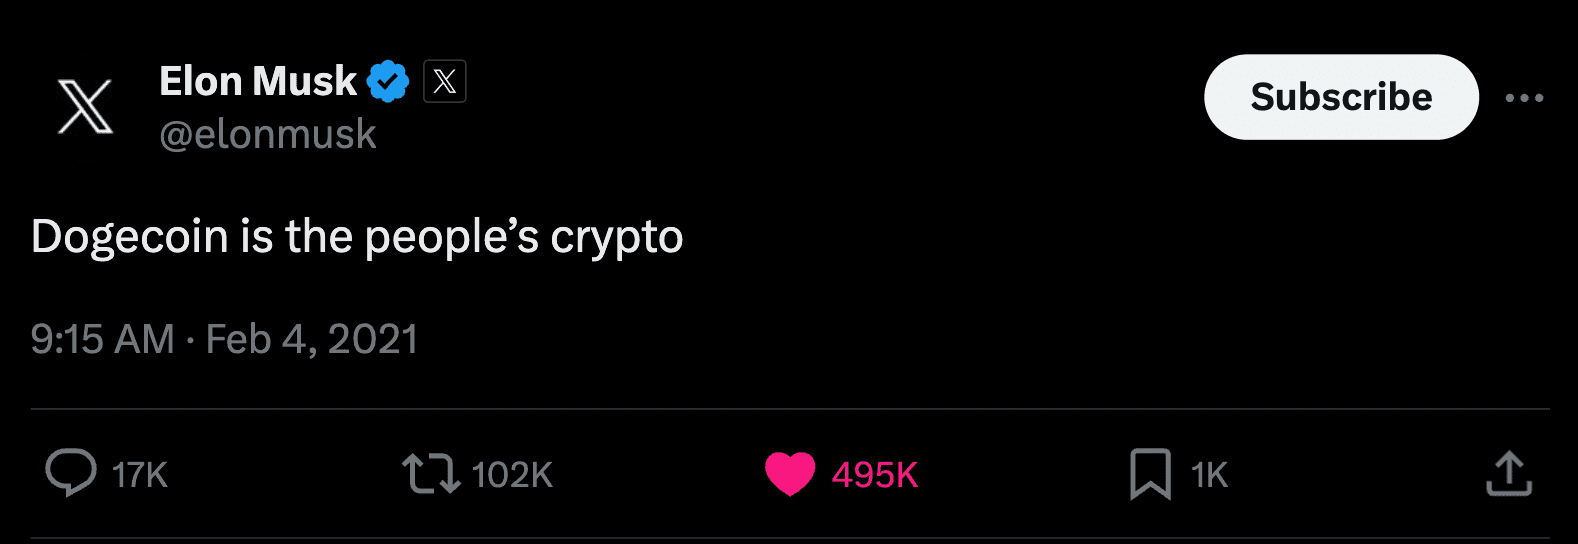 elon musk tweet doge coin is people crypto - image19.png